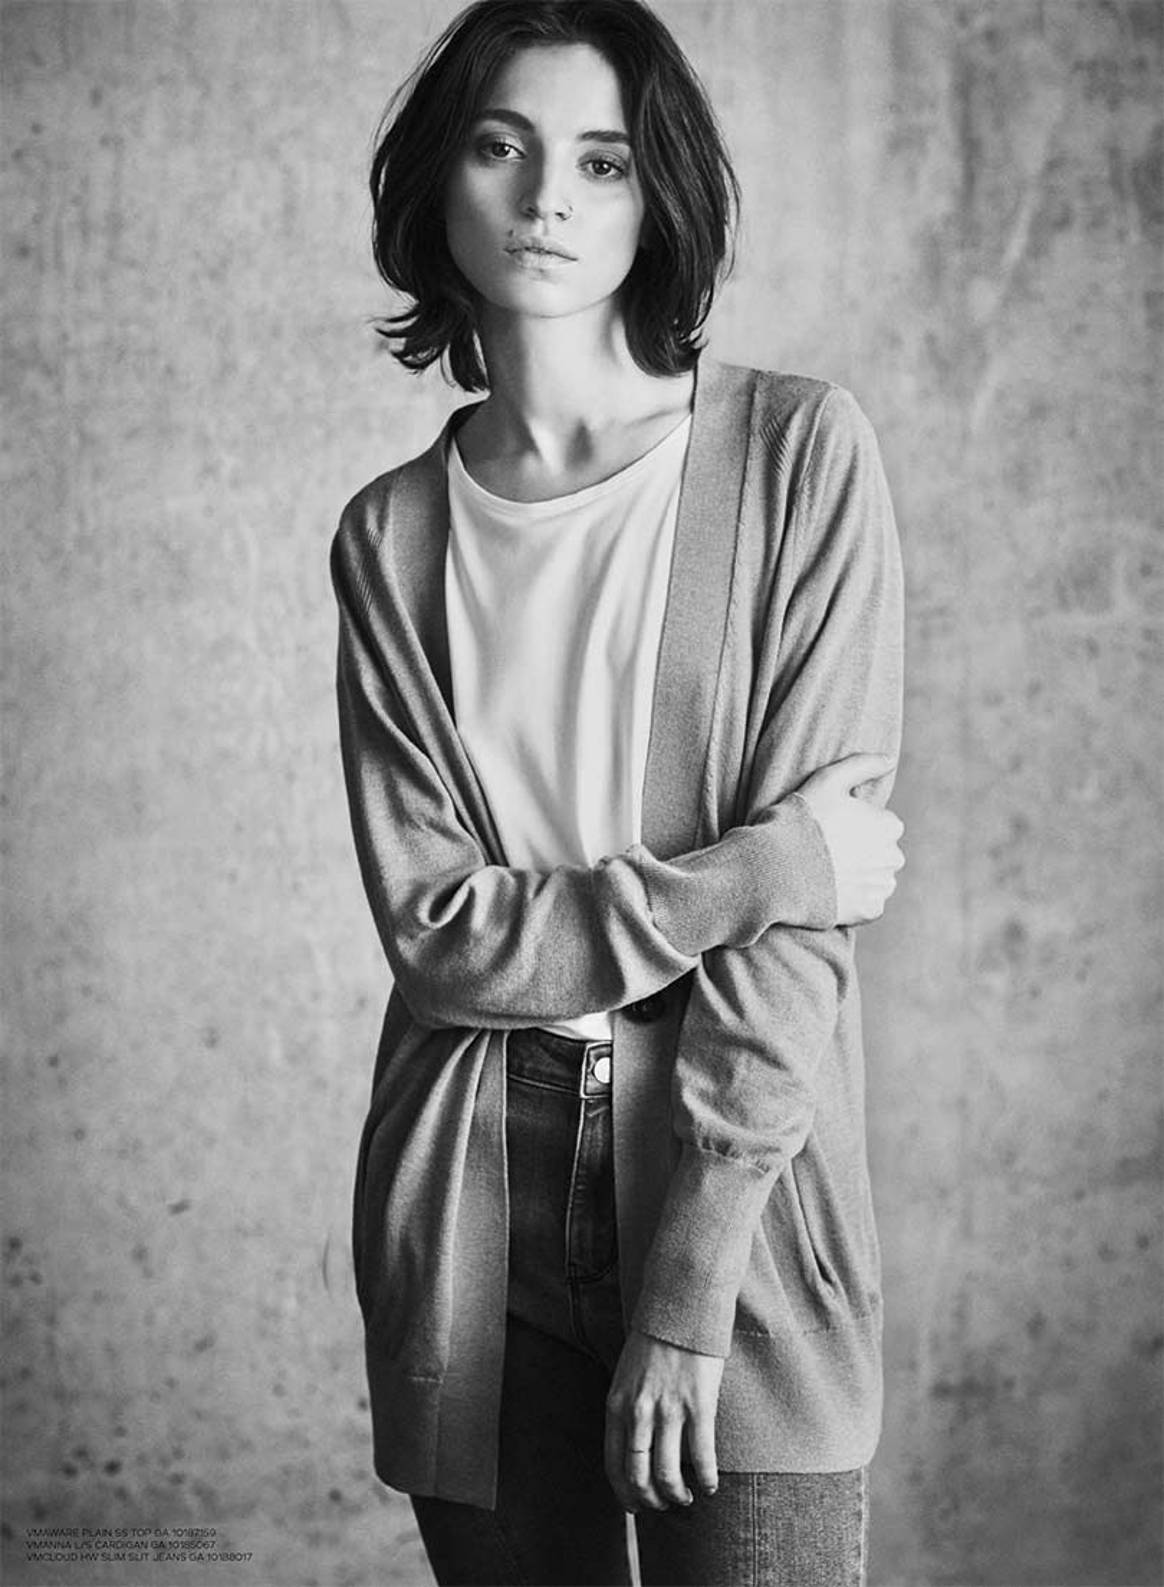 Vero Moda to launch debut sustainable collection: Aware